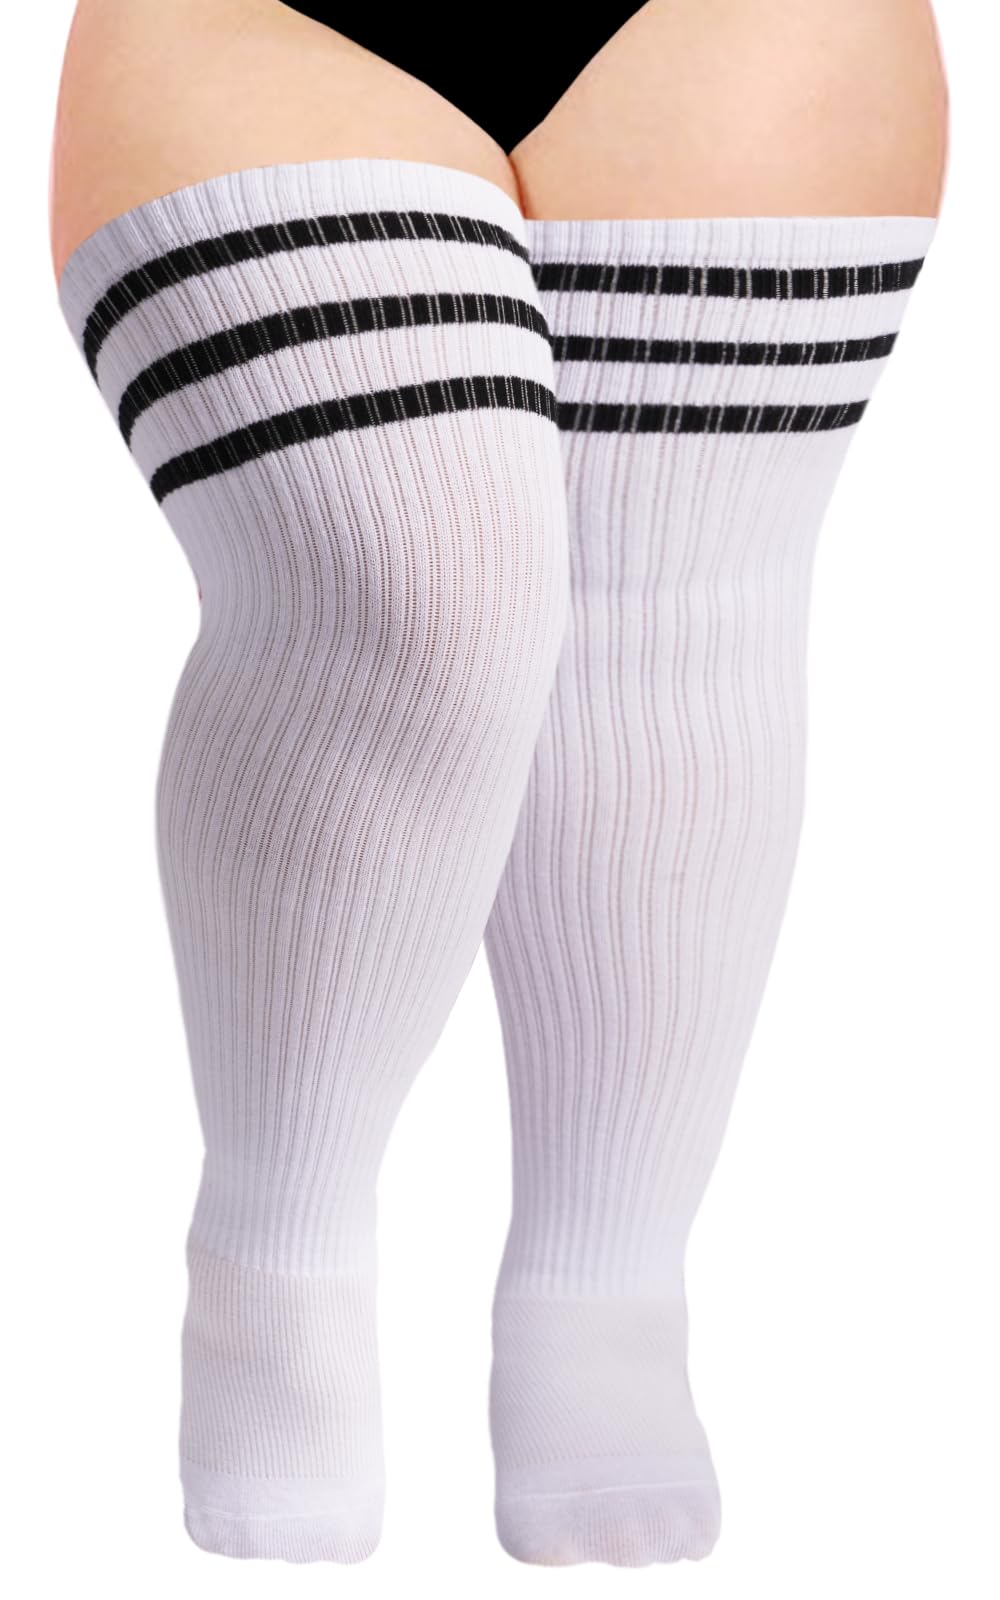 Womens Knit Cotton Extra Long Over the Knee High Socks-White & Black - Moon Wood